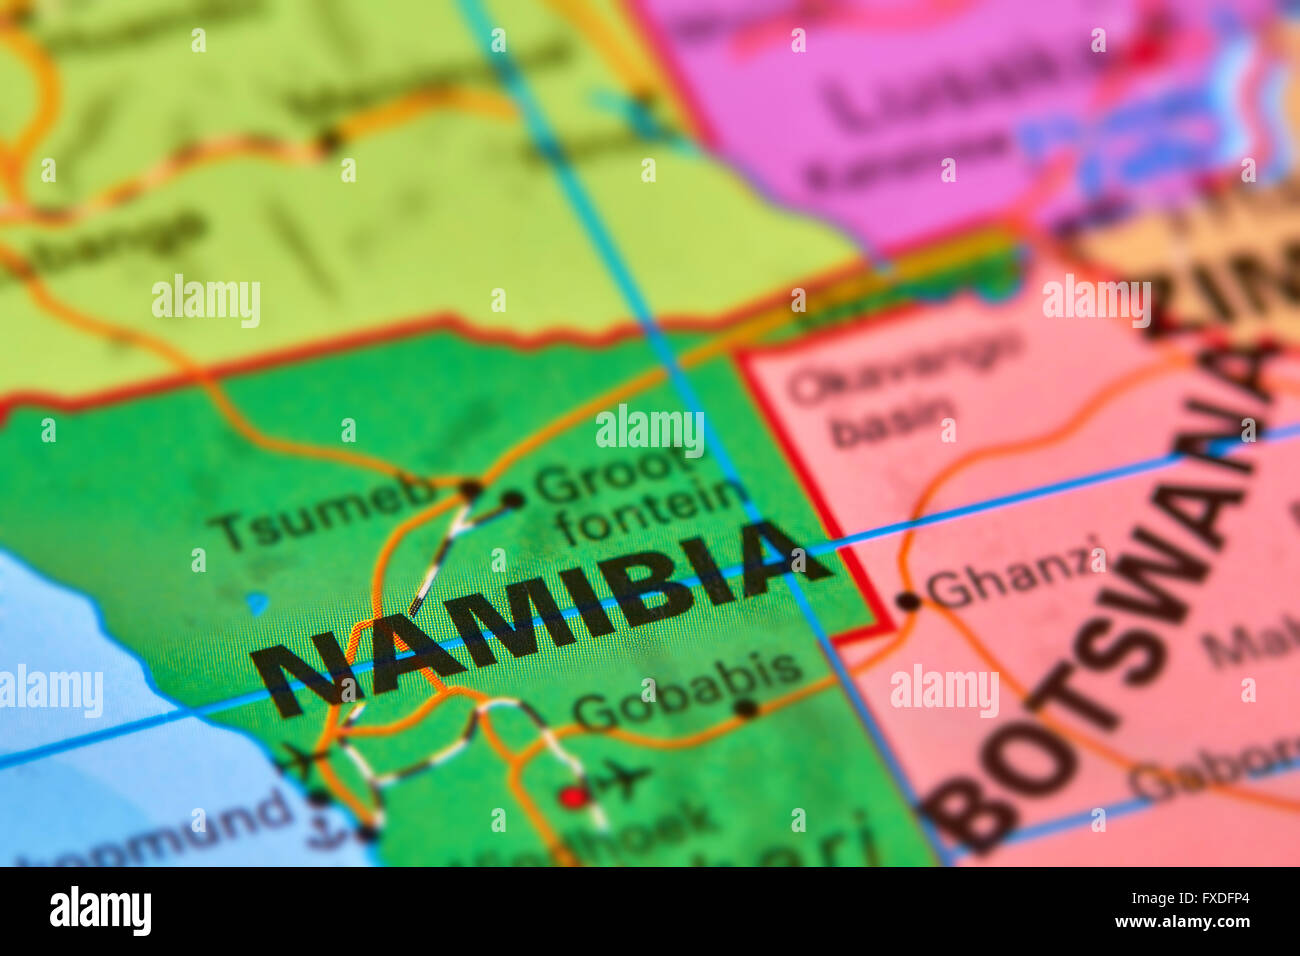 Namibia Country on the World Map Stock Photo